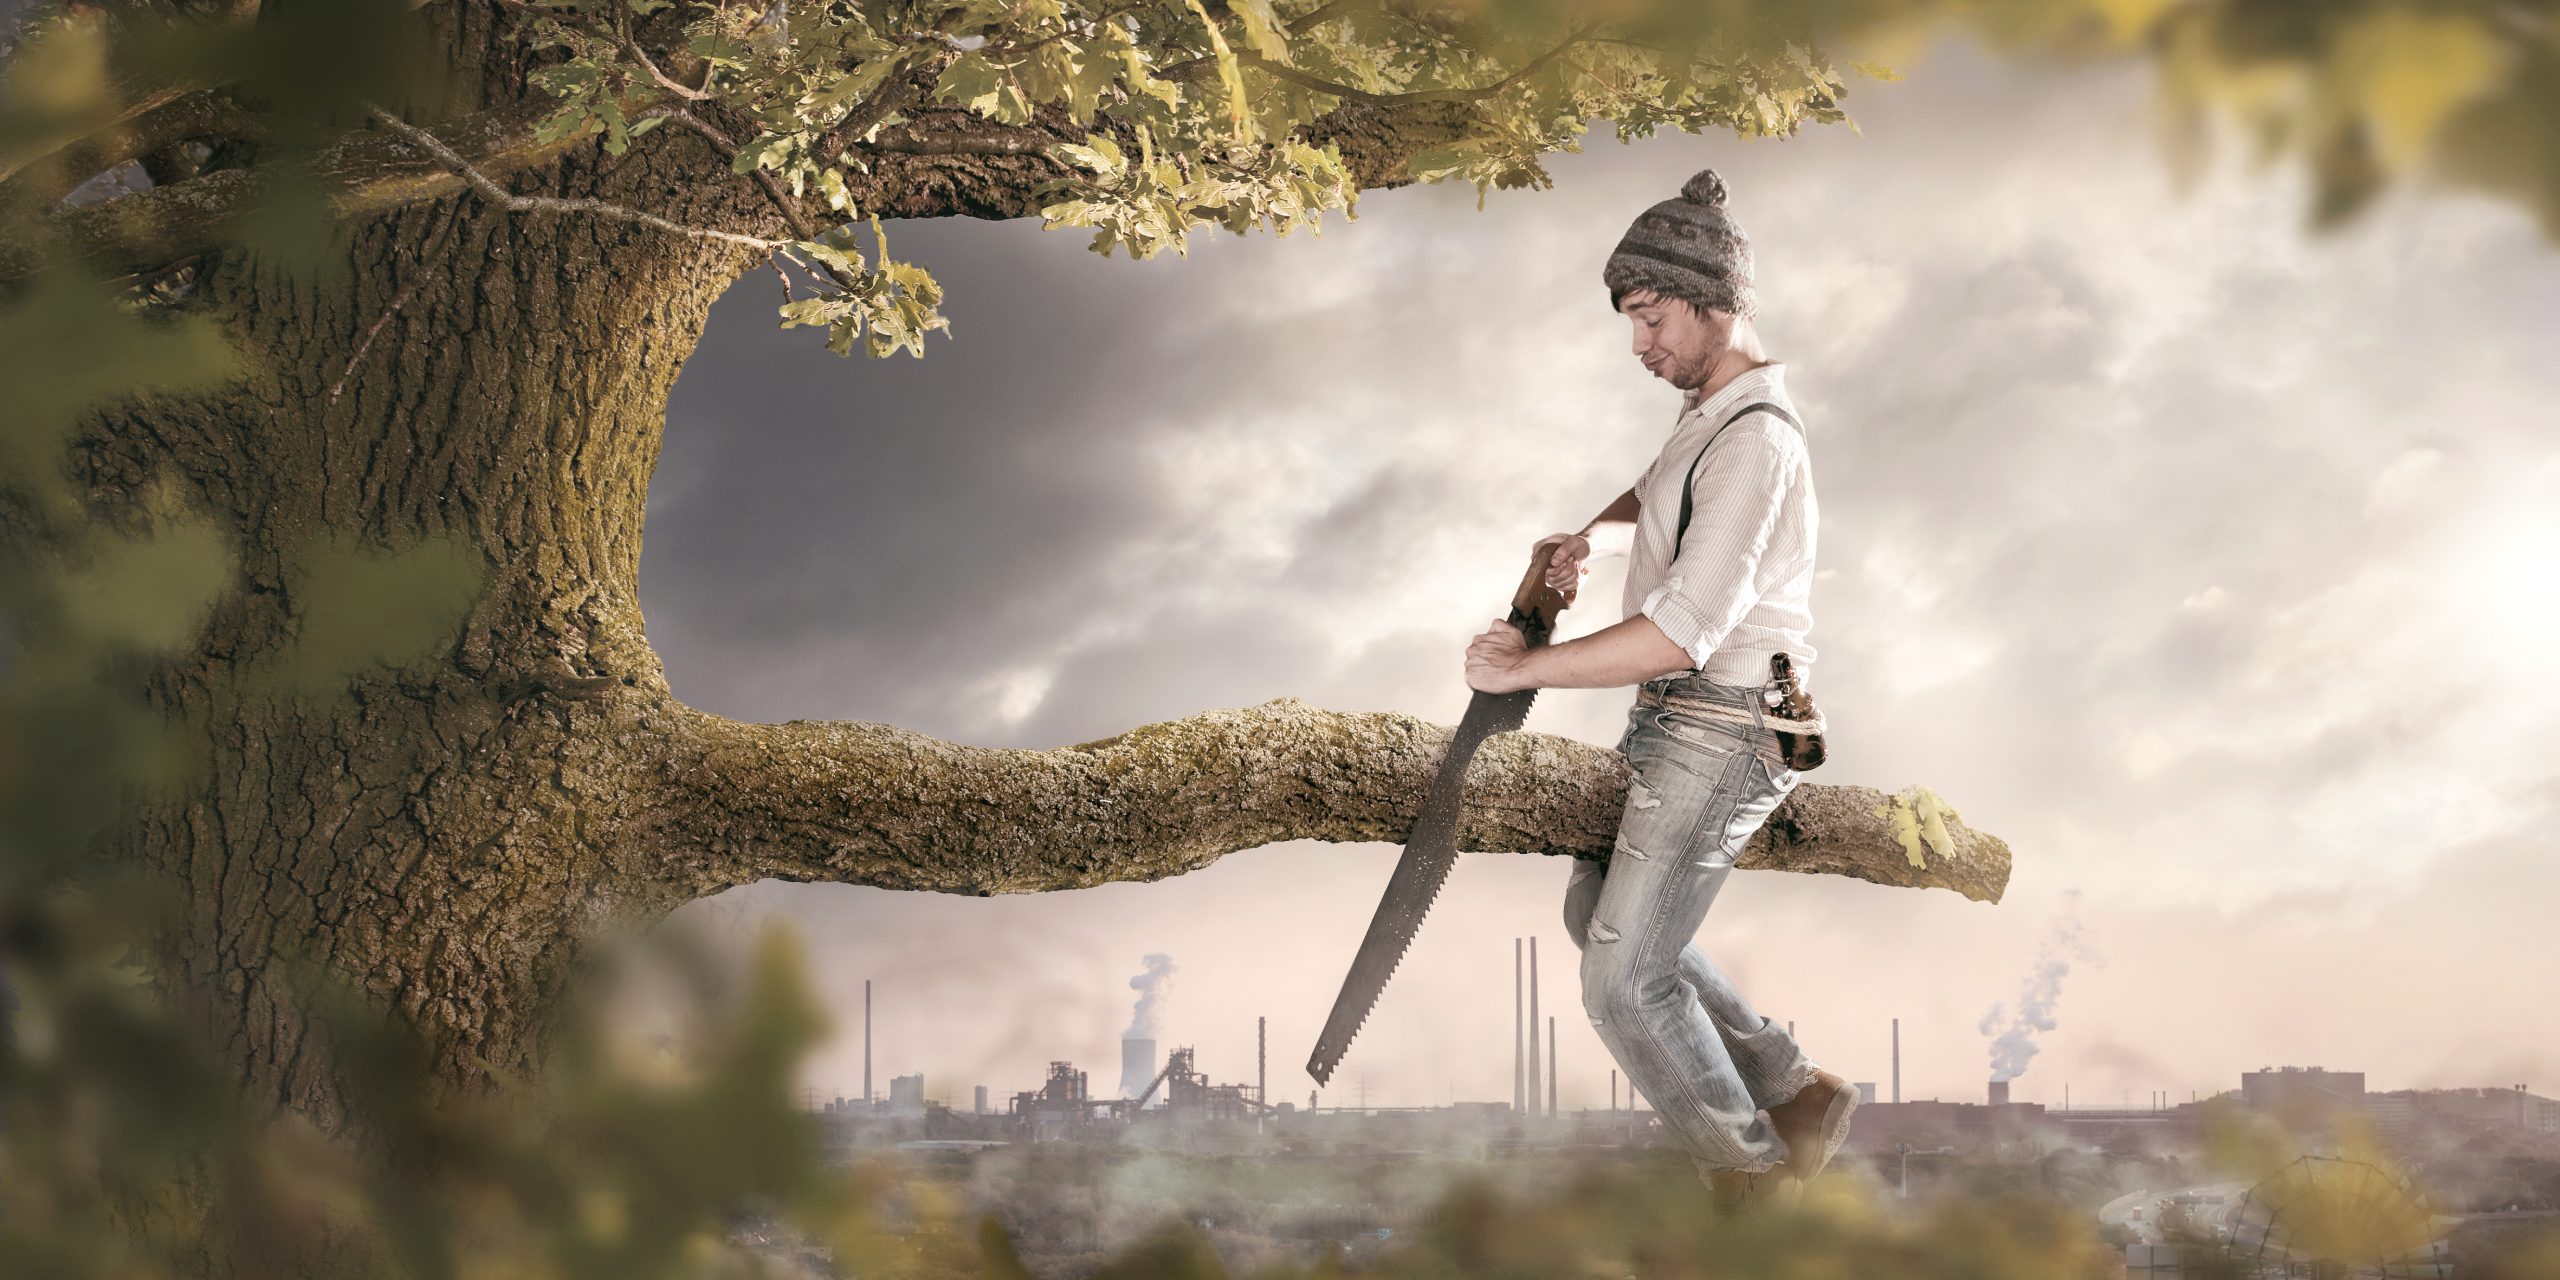 A man is sitting on a branch he is about to cut off. The background shows an industrial area which is polluting the surroundings. Thus the image conveys a secondary meaning towards environmental pollution.